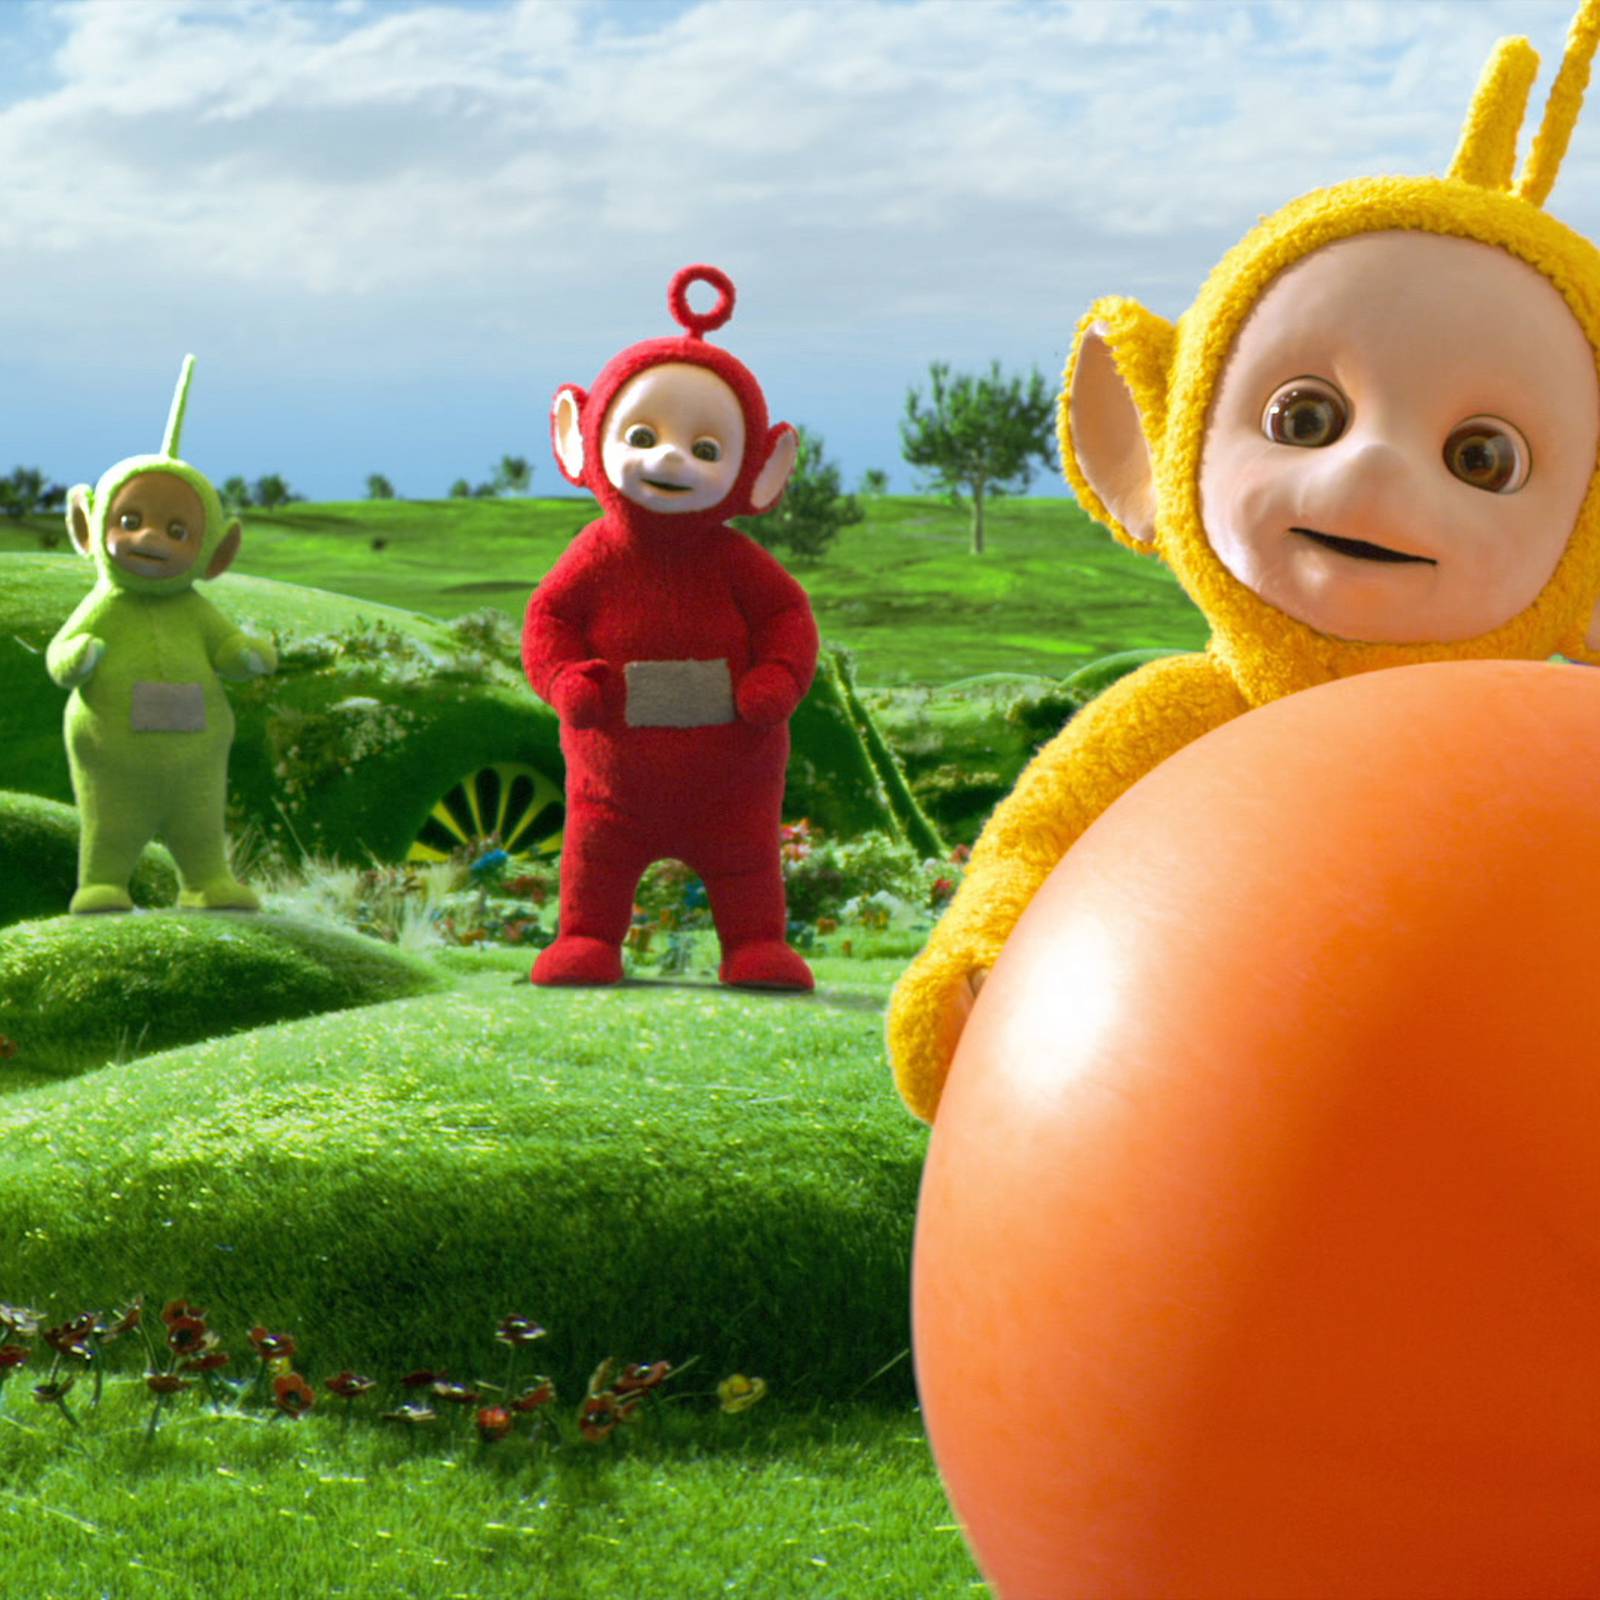 Teletubbies has been rebooted. Is it still the weirdest way to